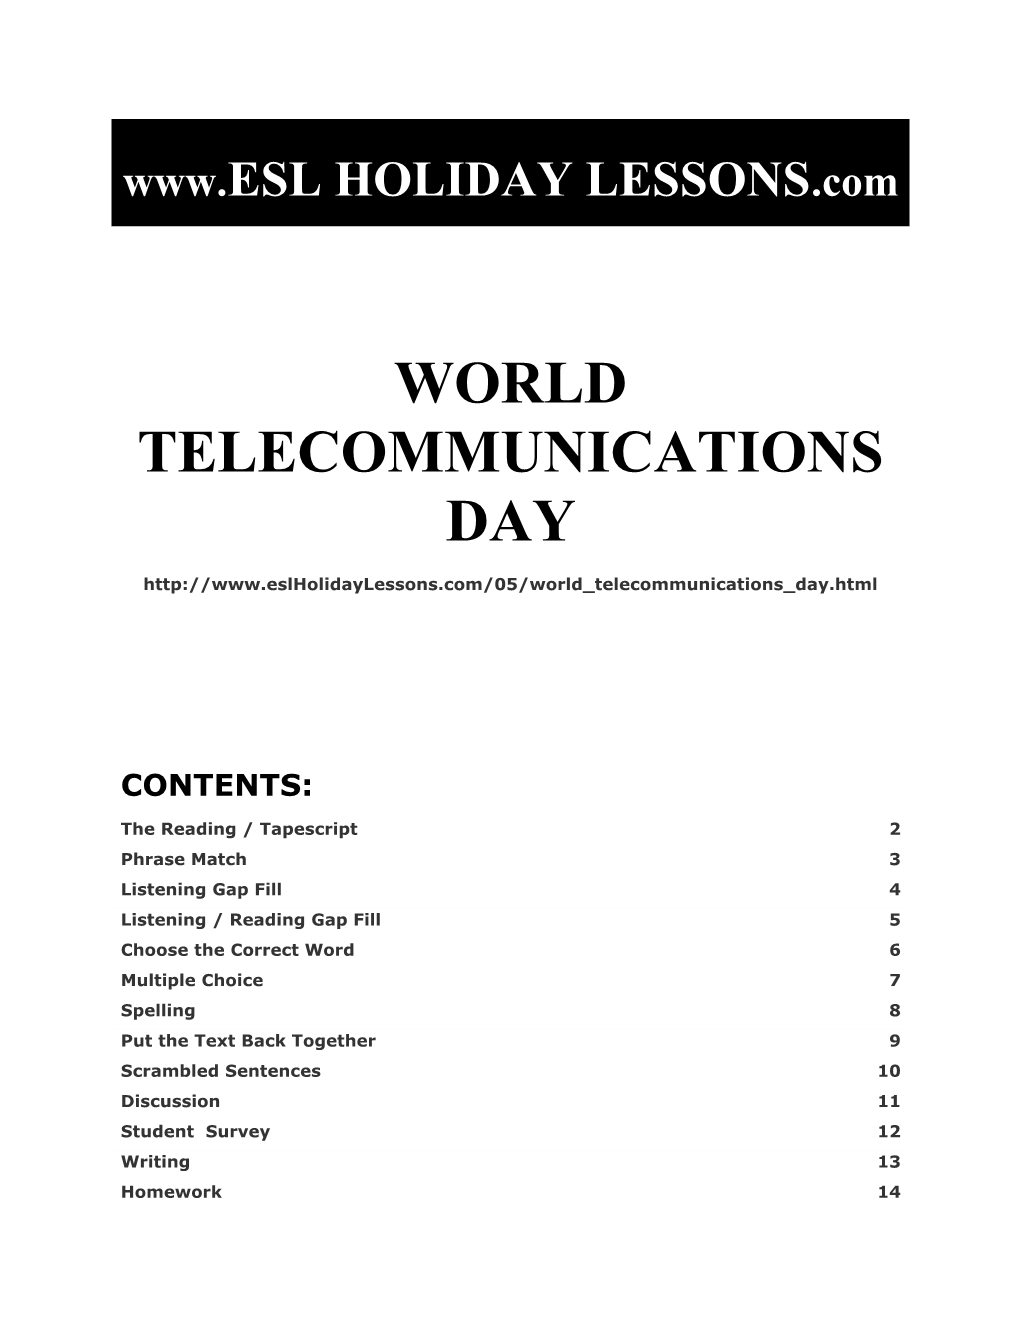 Holiday Lessons - World Telecommunications Day